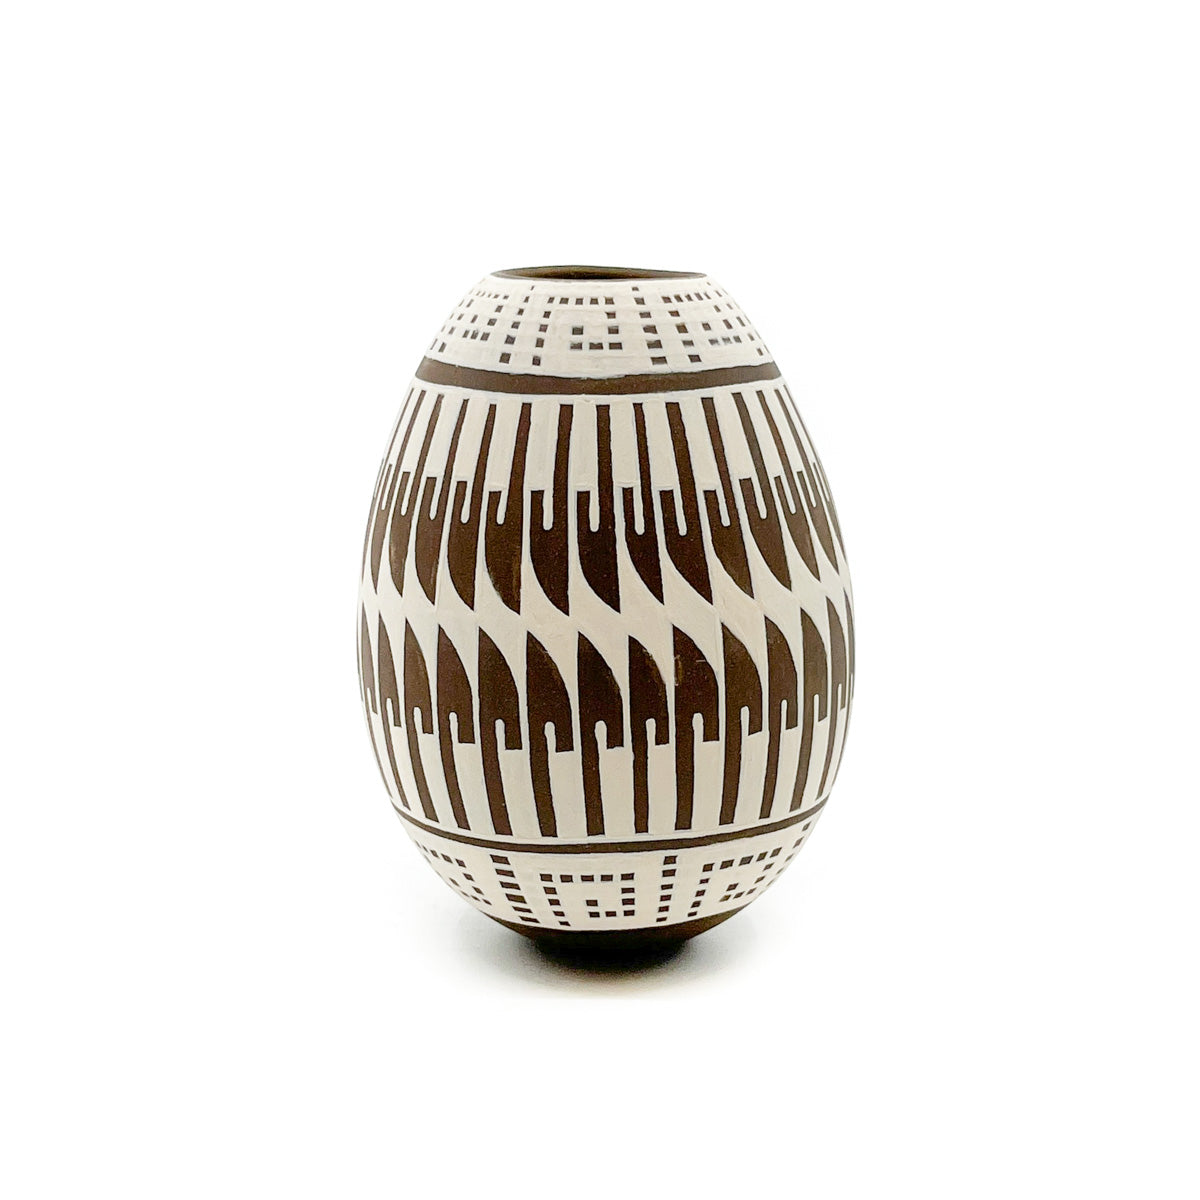 Feather Patterned White on Brown Pot